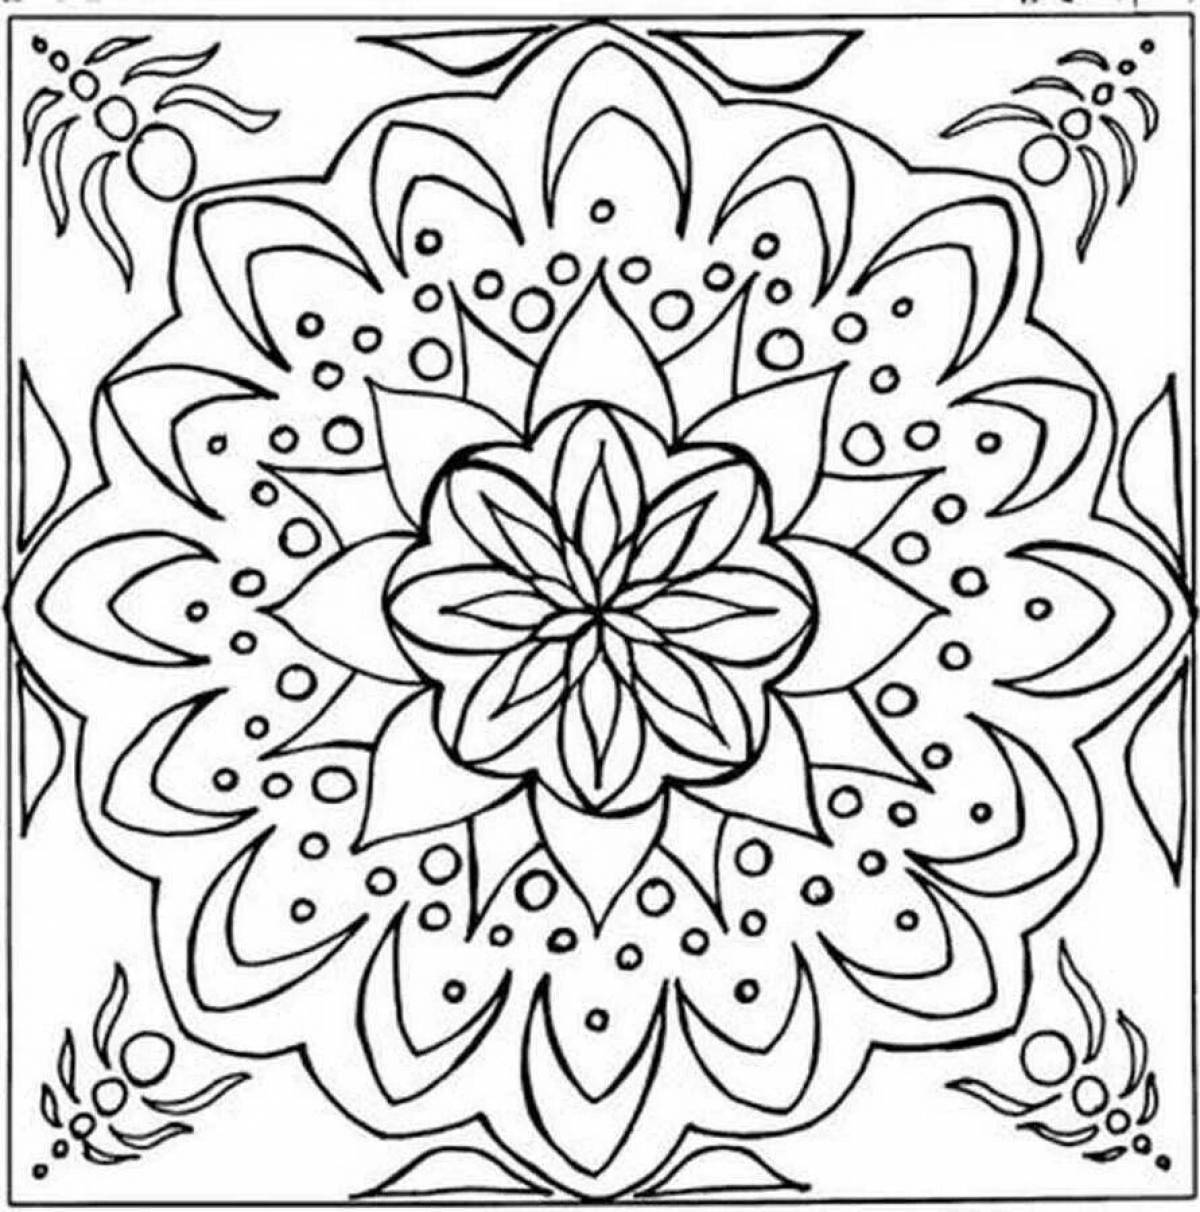 Pavloposad scarf coloring page for children